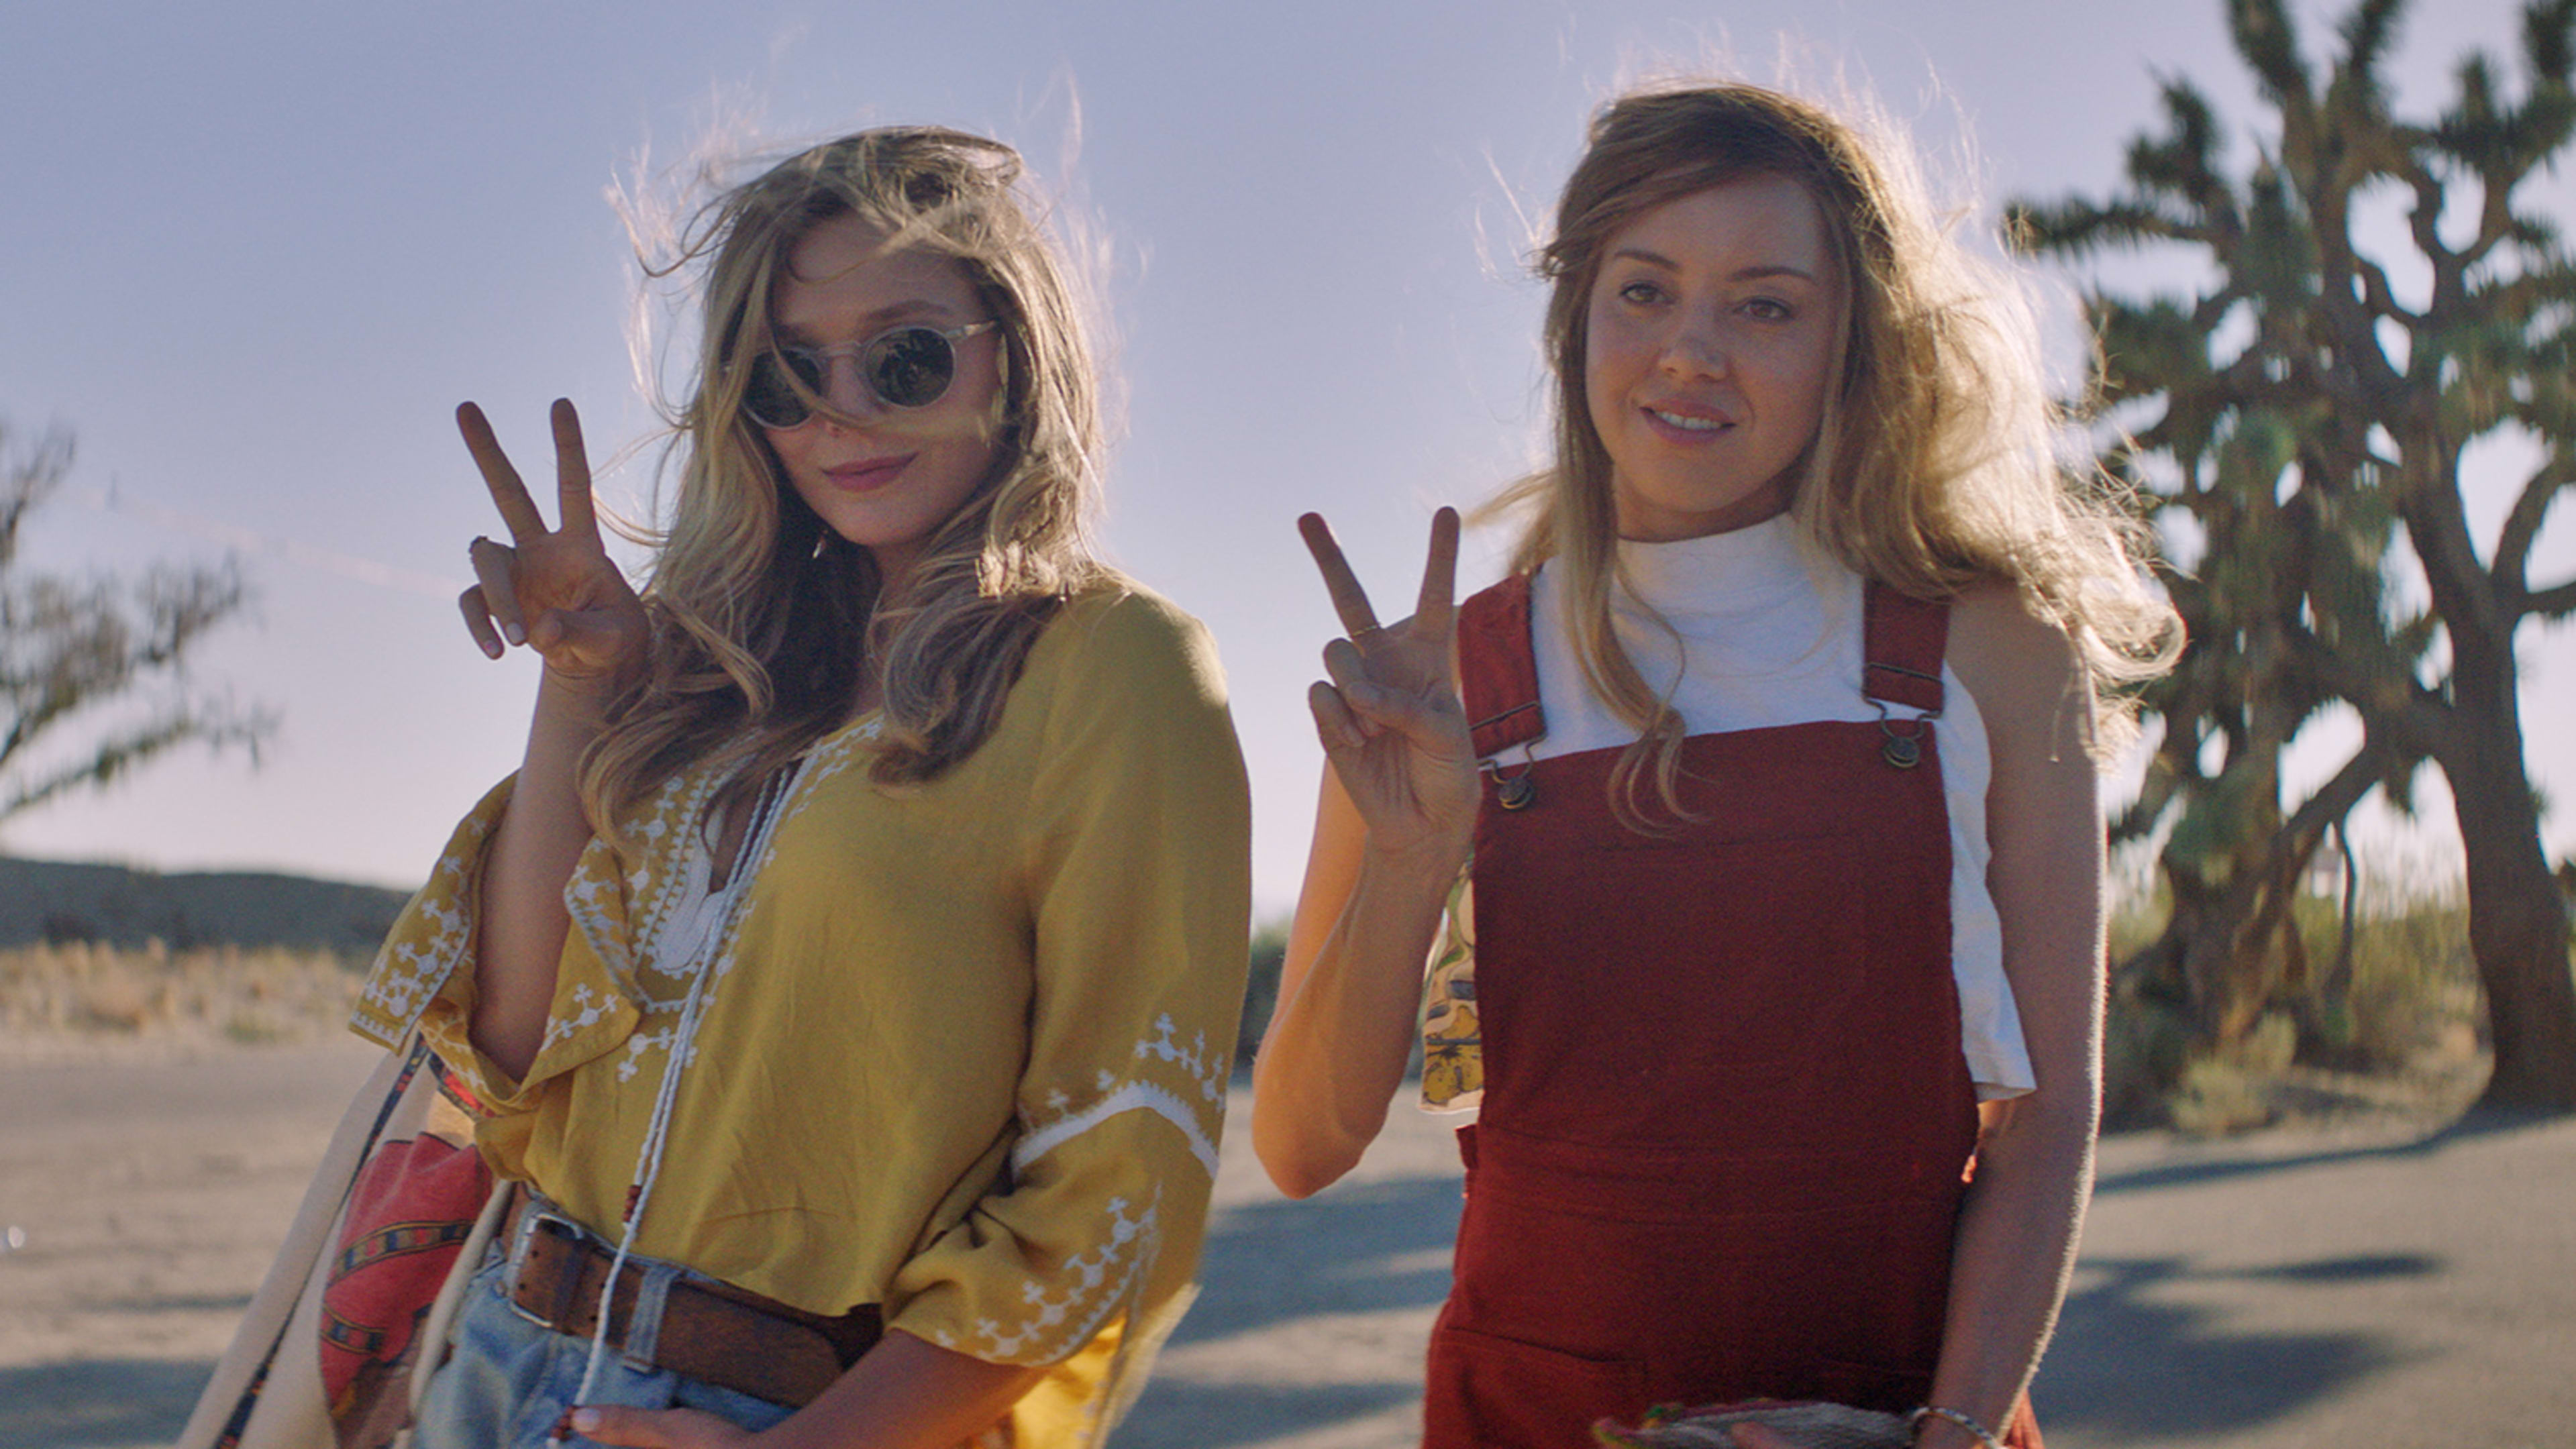 Aubrey Plaza On “Ingrid Goes West” And How Instagram Feeds Obsession